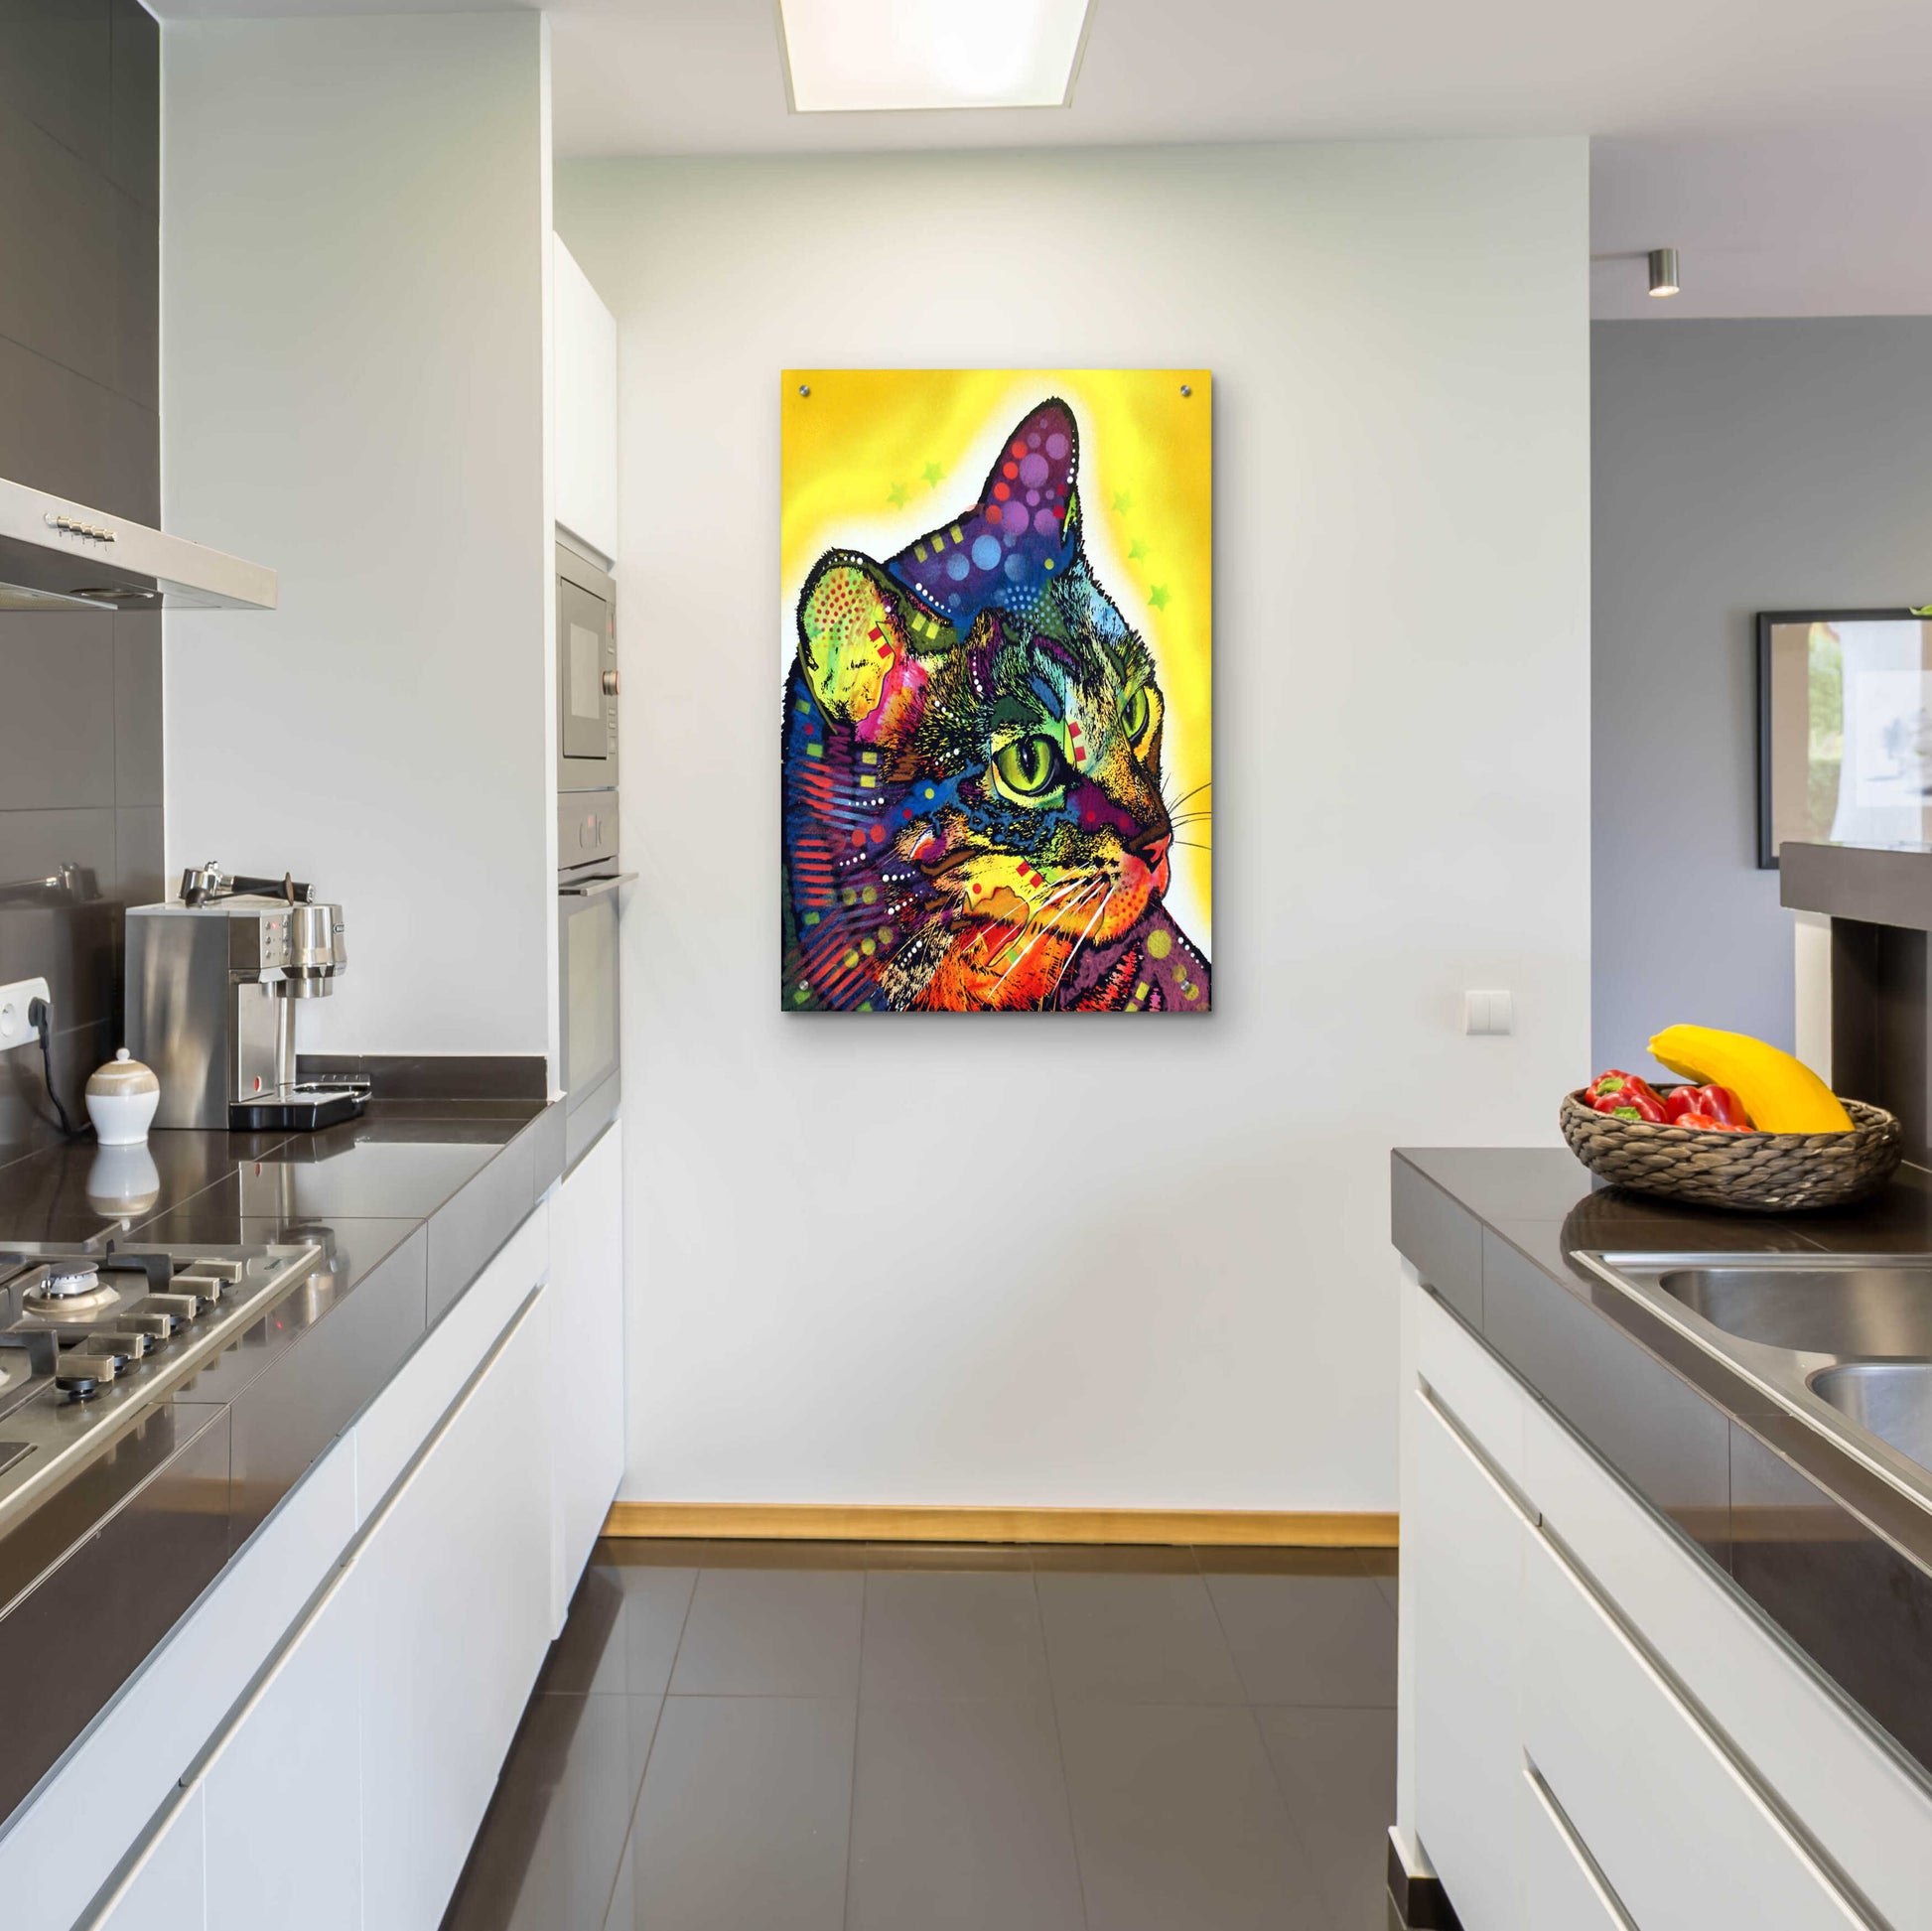 Epic Art 'Confident Cat' by Dean Russo, Acrylic Glass Wall Art,24x36